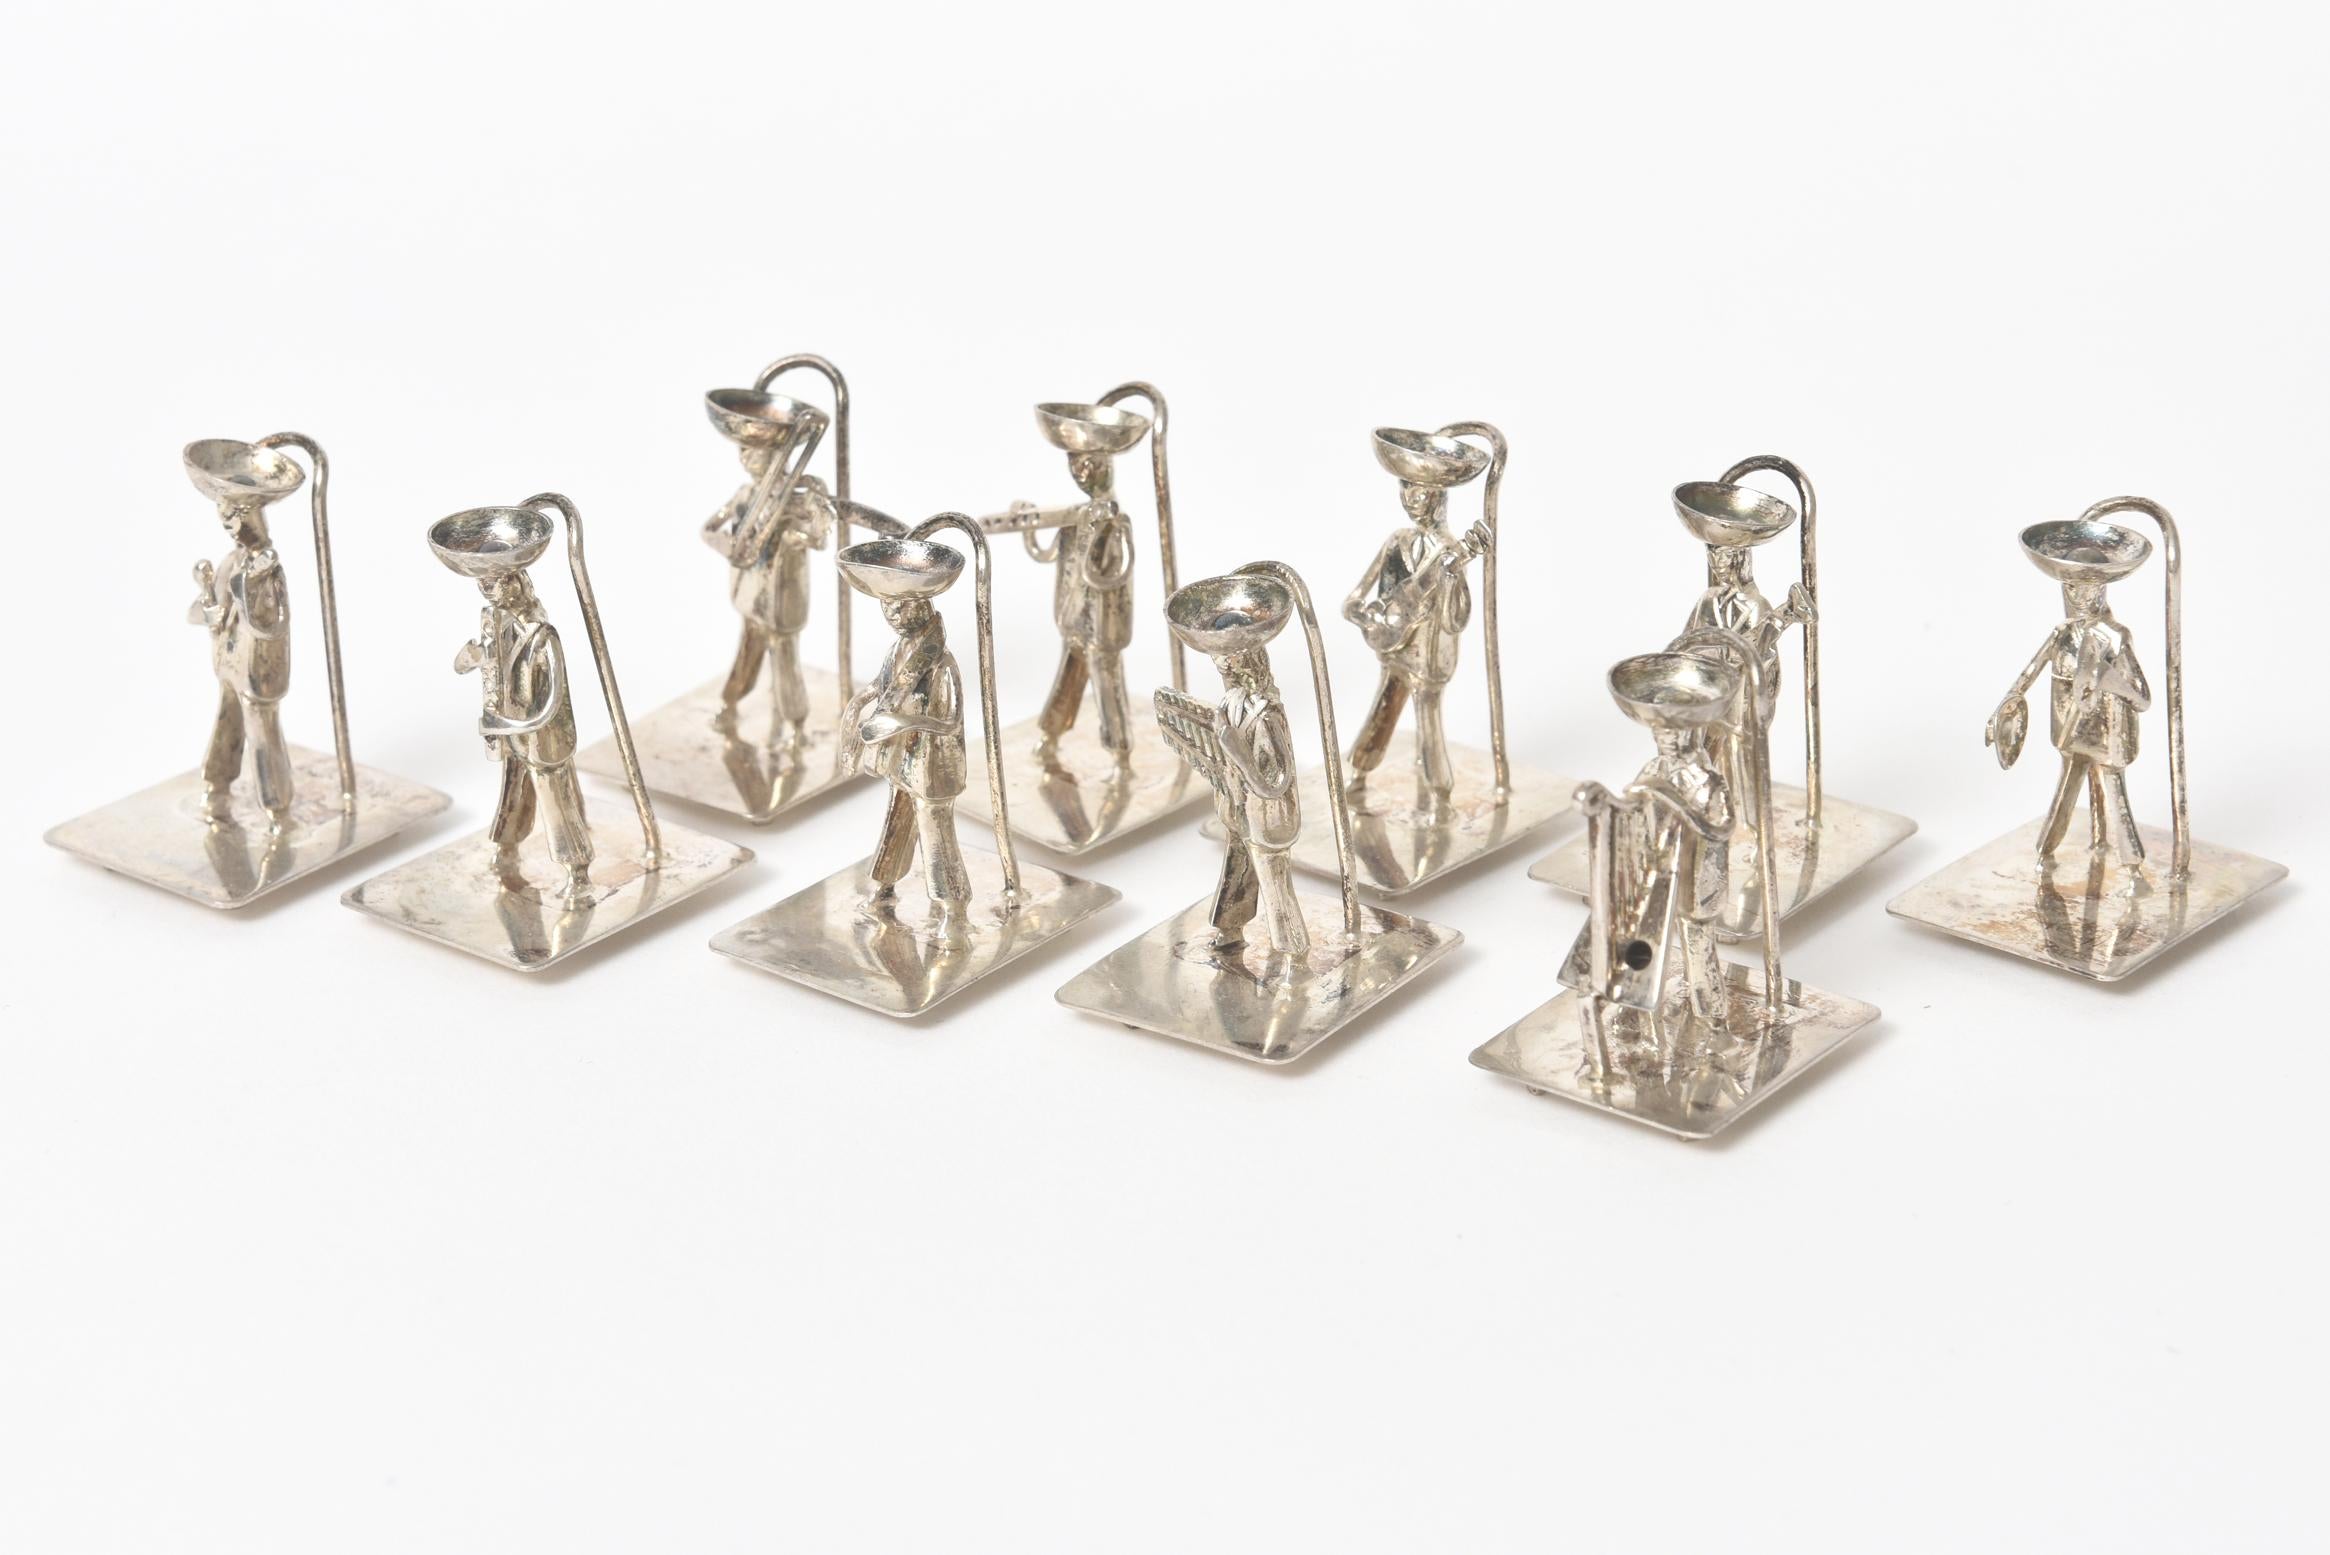 Delightful set of 10 - 900 silver figural place cardsholders featuring a group of mariachis playing instruments.

Marked on the bottom 900.